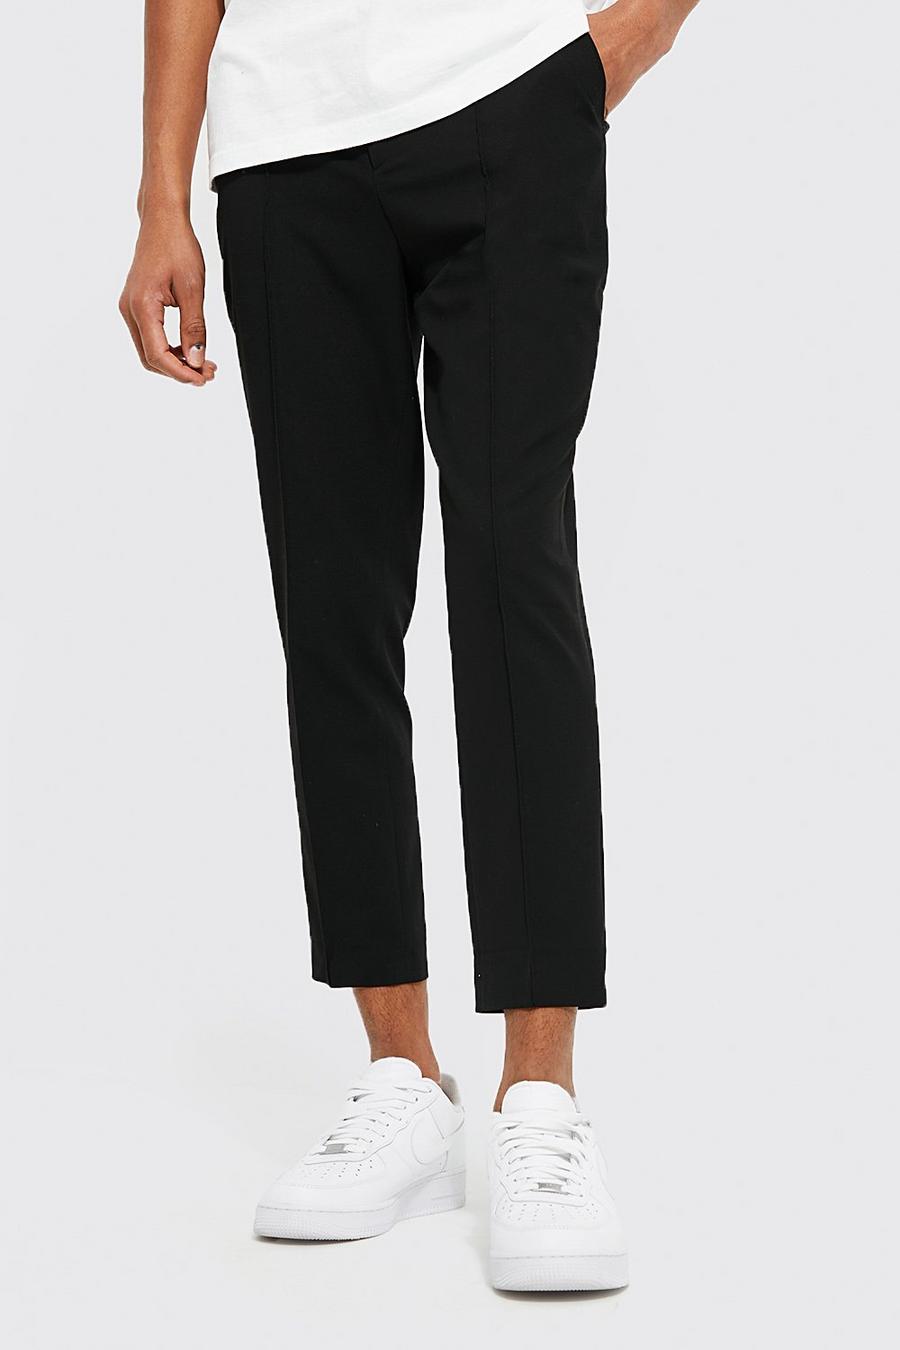 Black Skinny Plain Tapered Smart Trouser With Pintuck